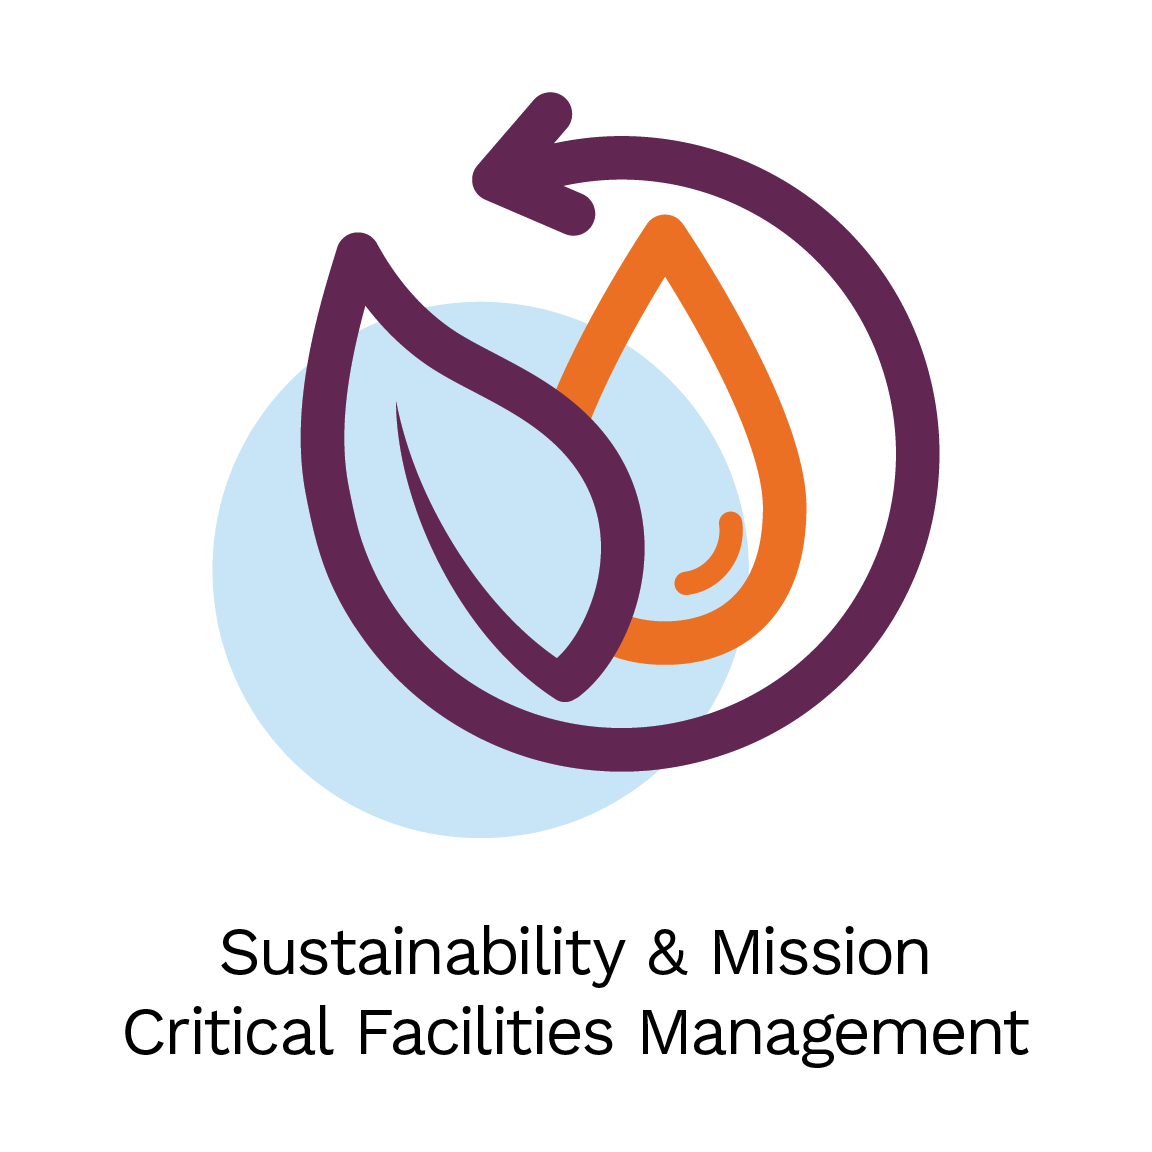 Sustainability & Mission Critical Facilities Management